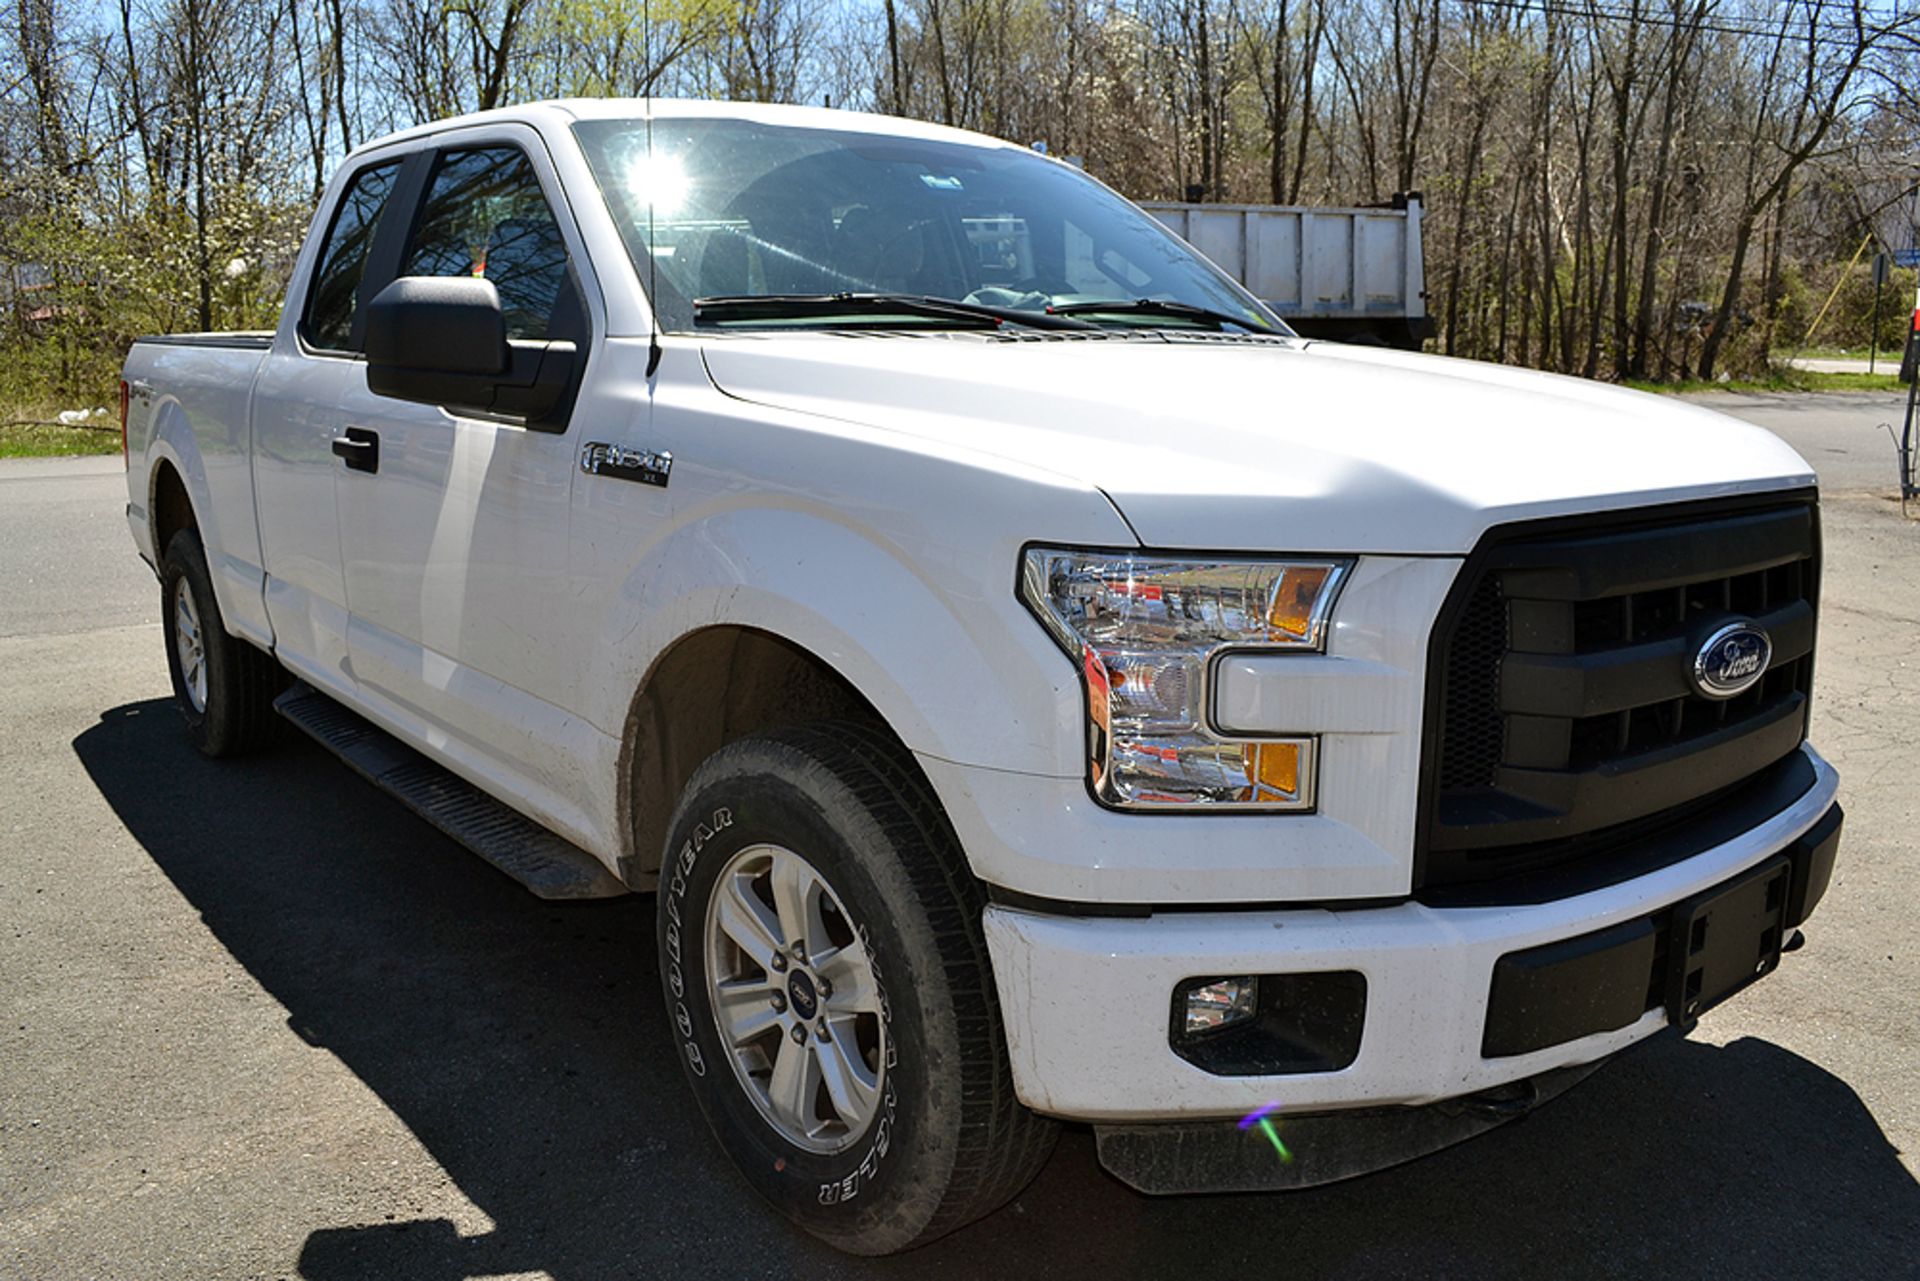 2015 Ford F150 Lariat SuperCab, 4WD Pick Up Truck - Image 5 of 11